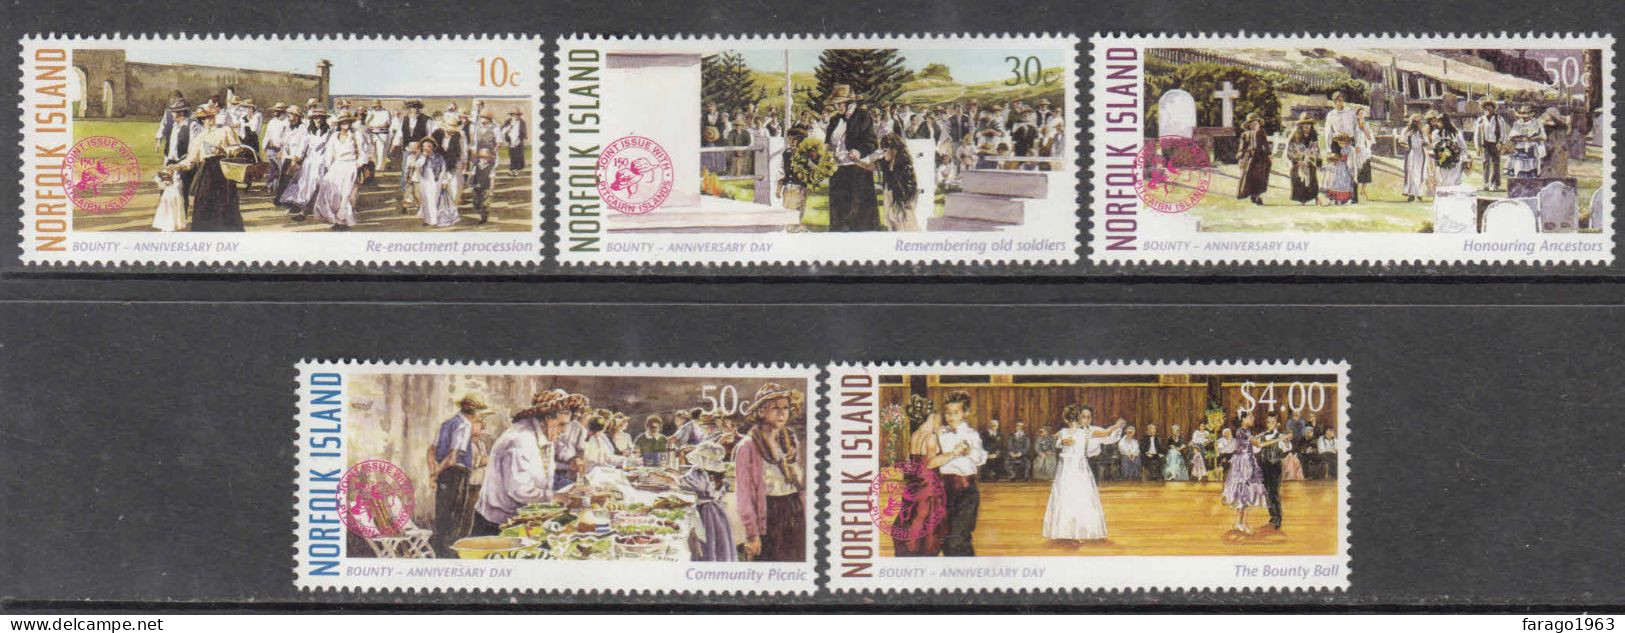 2006 Norfolk Island Bounty Anniversary Day JOINT ISSUE Pitcairn  Complete Set Of 5 MNH - Norfolkinsel